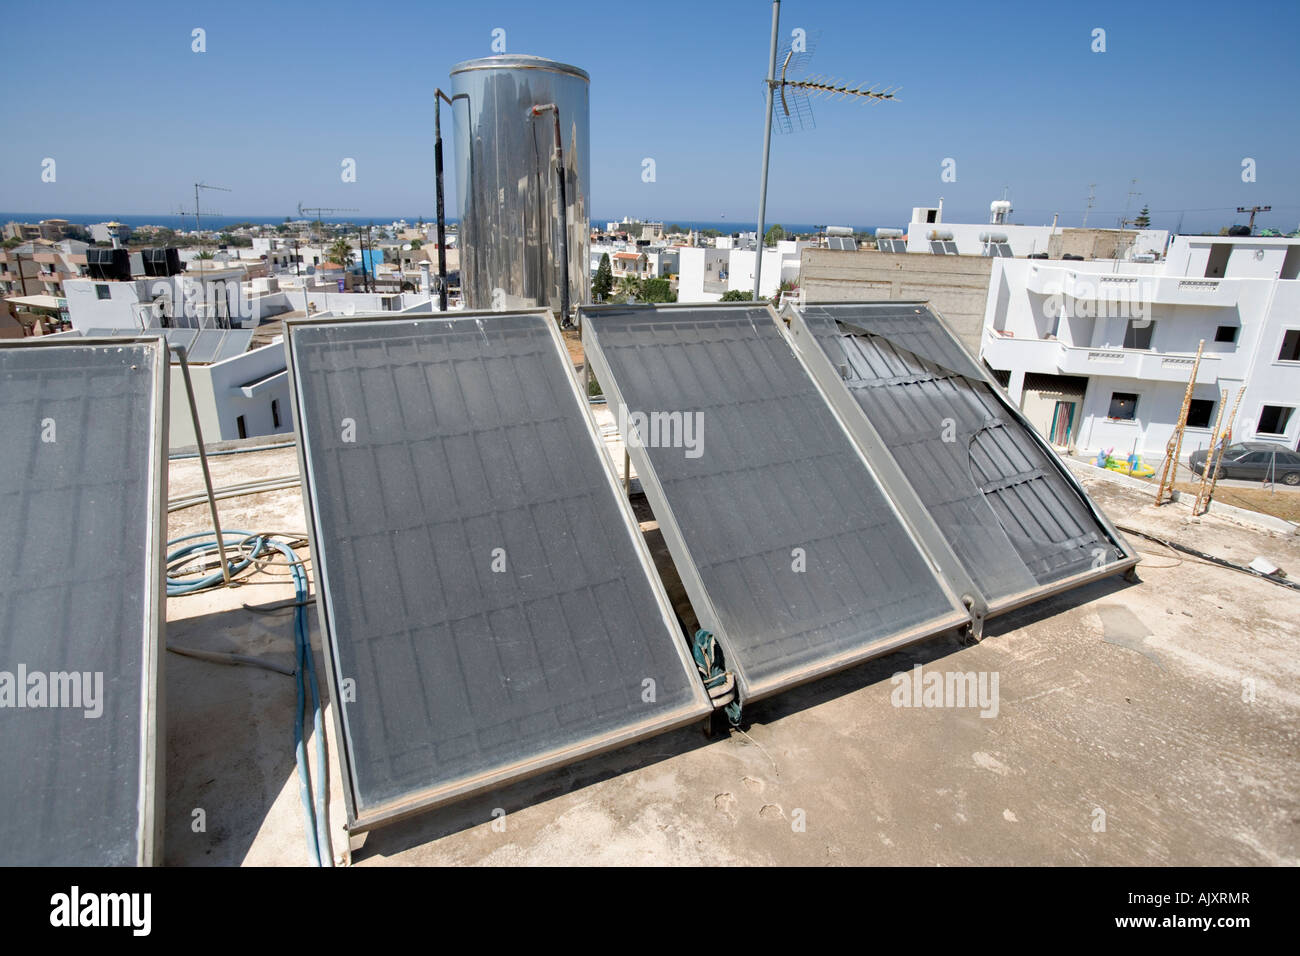 Damaged Solar Water Heating Panels on Hotel Roof in Crete,Greece Stock Photo